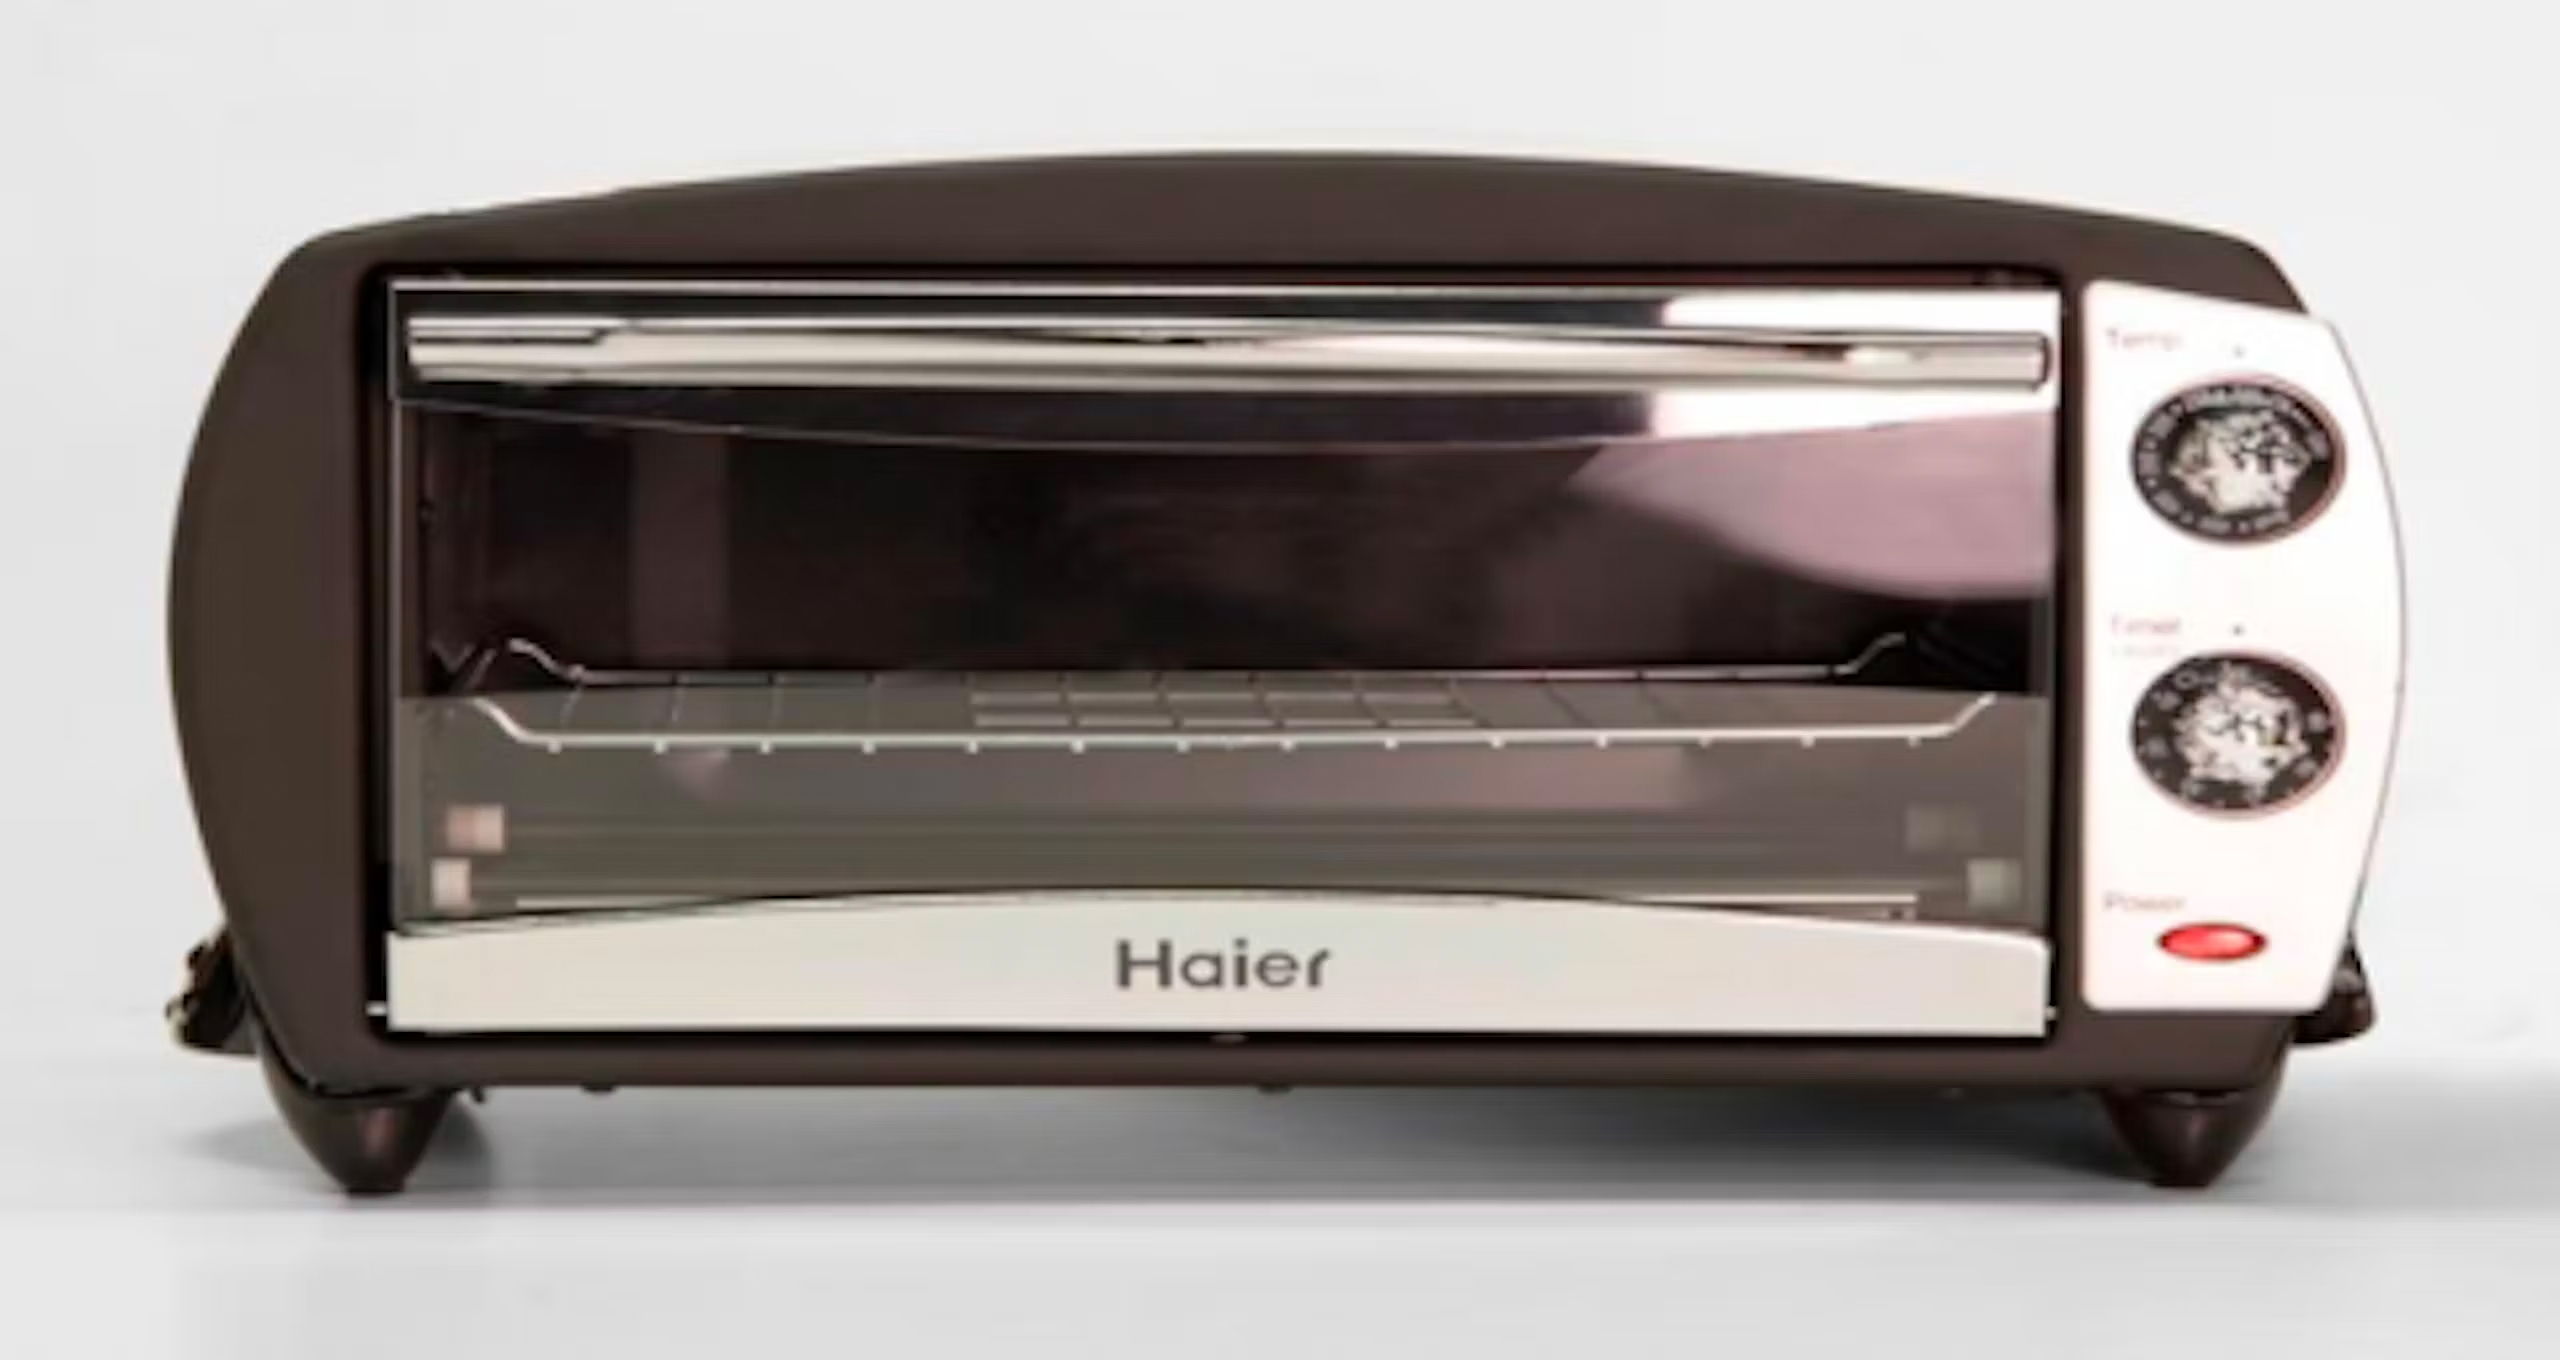 Product photo of a Haier toaster oven currently being recalled